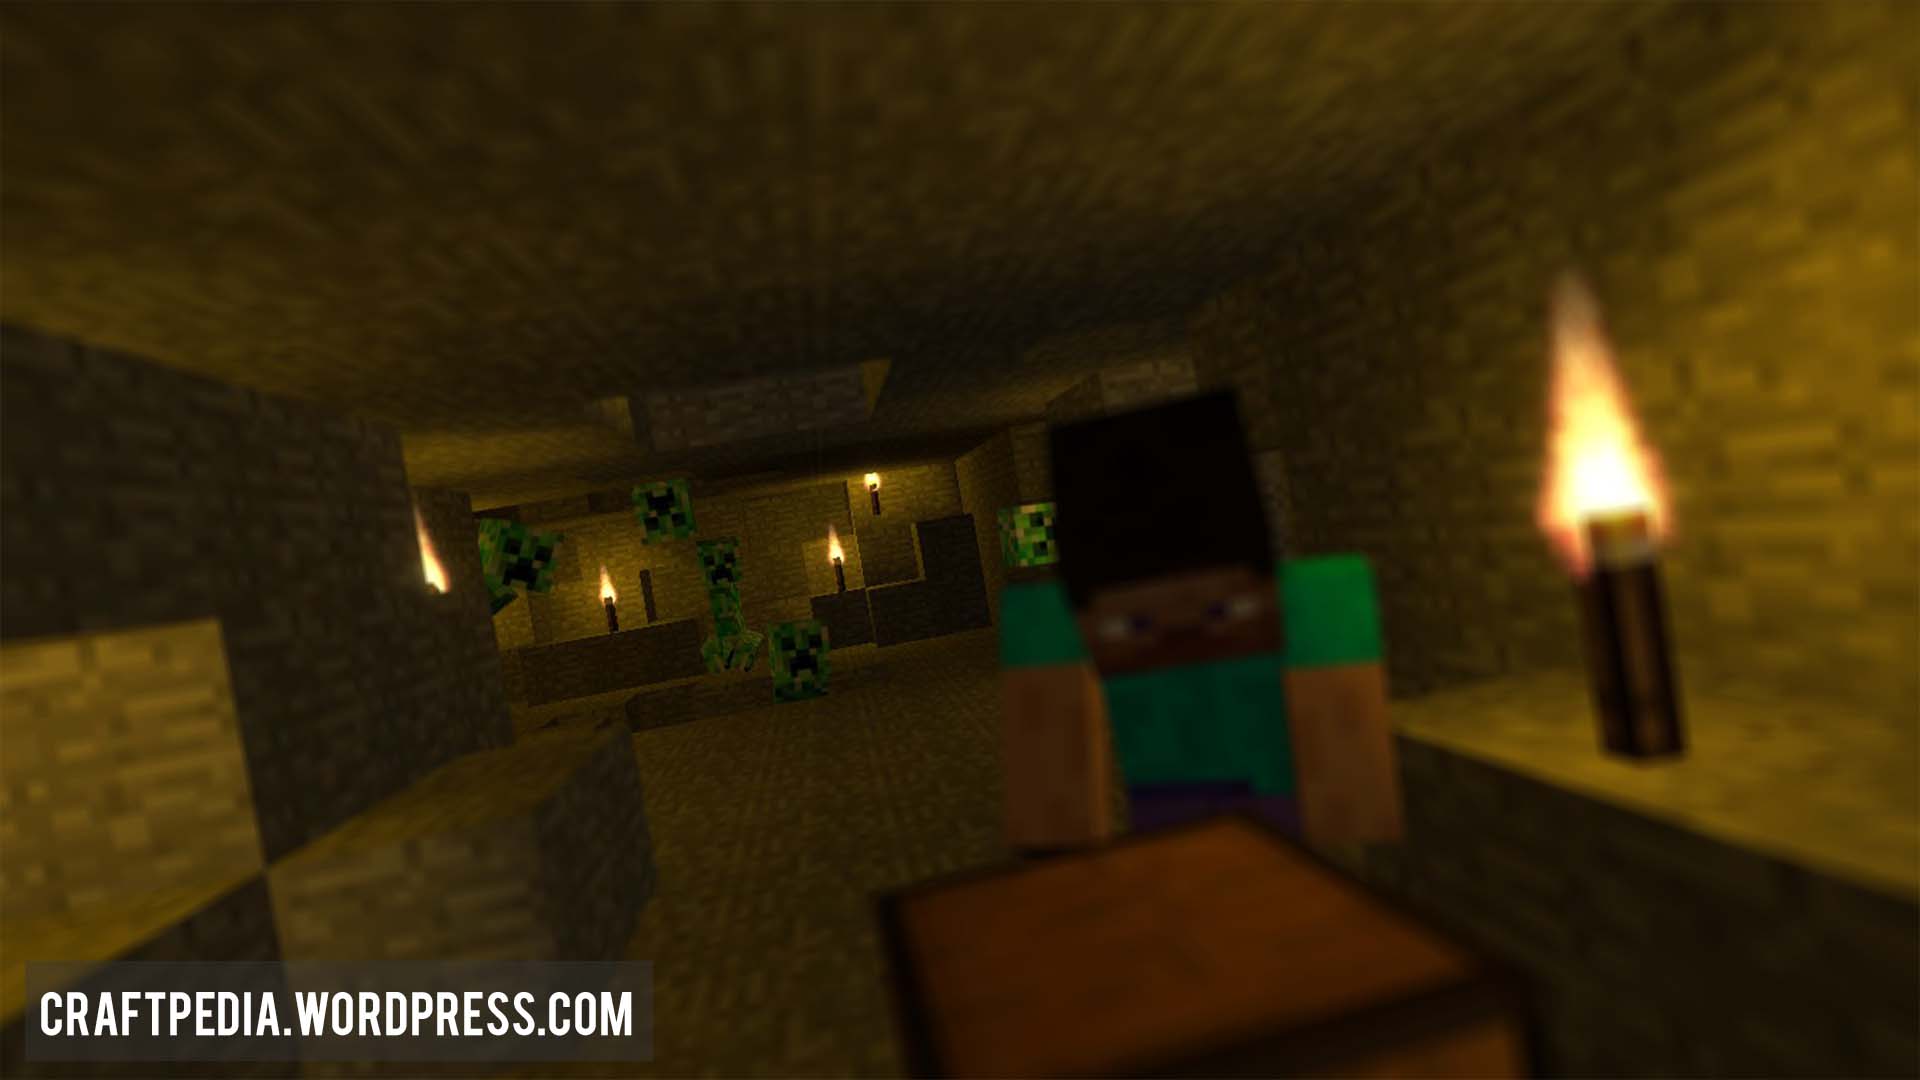 This Cool Animated Creepers Creepin Wallpaper Shows You What